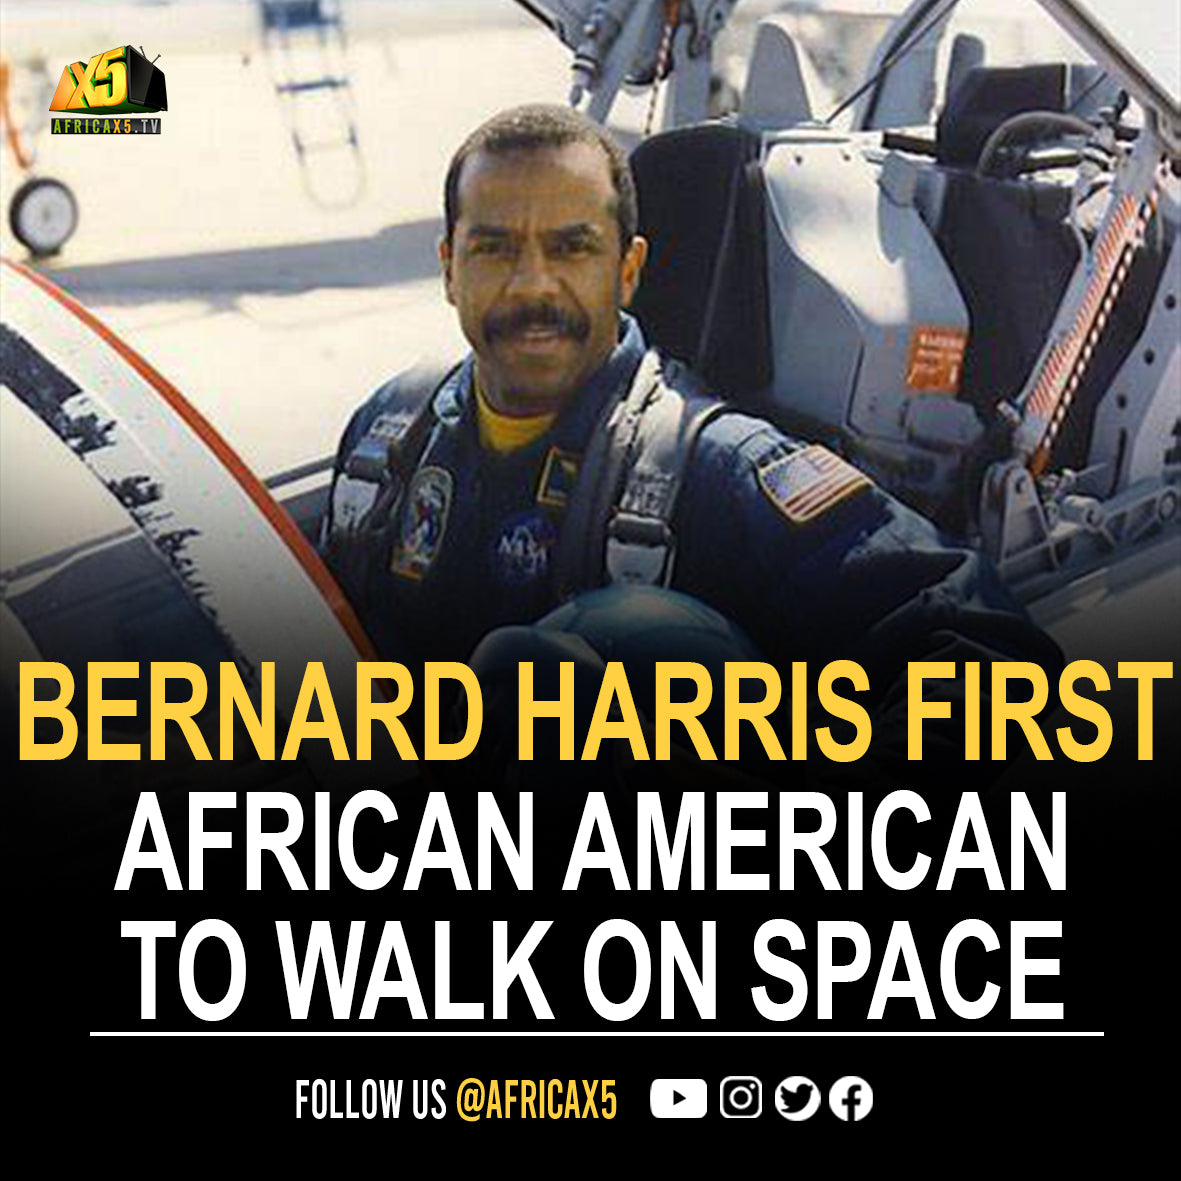 Bernard Harris, Jr. became the first African American astronaut to walk in space.